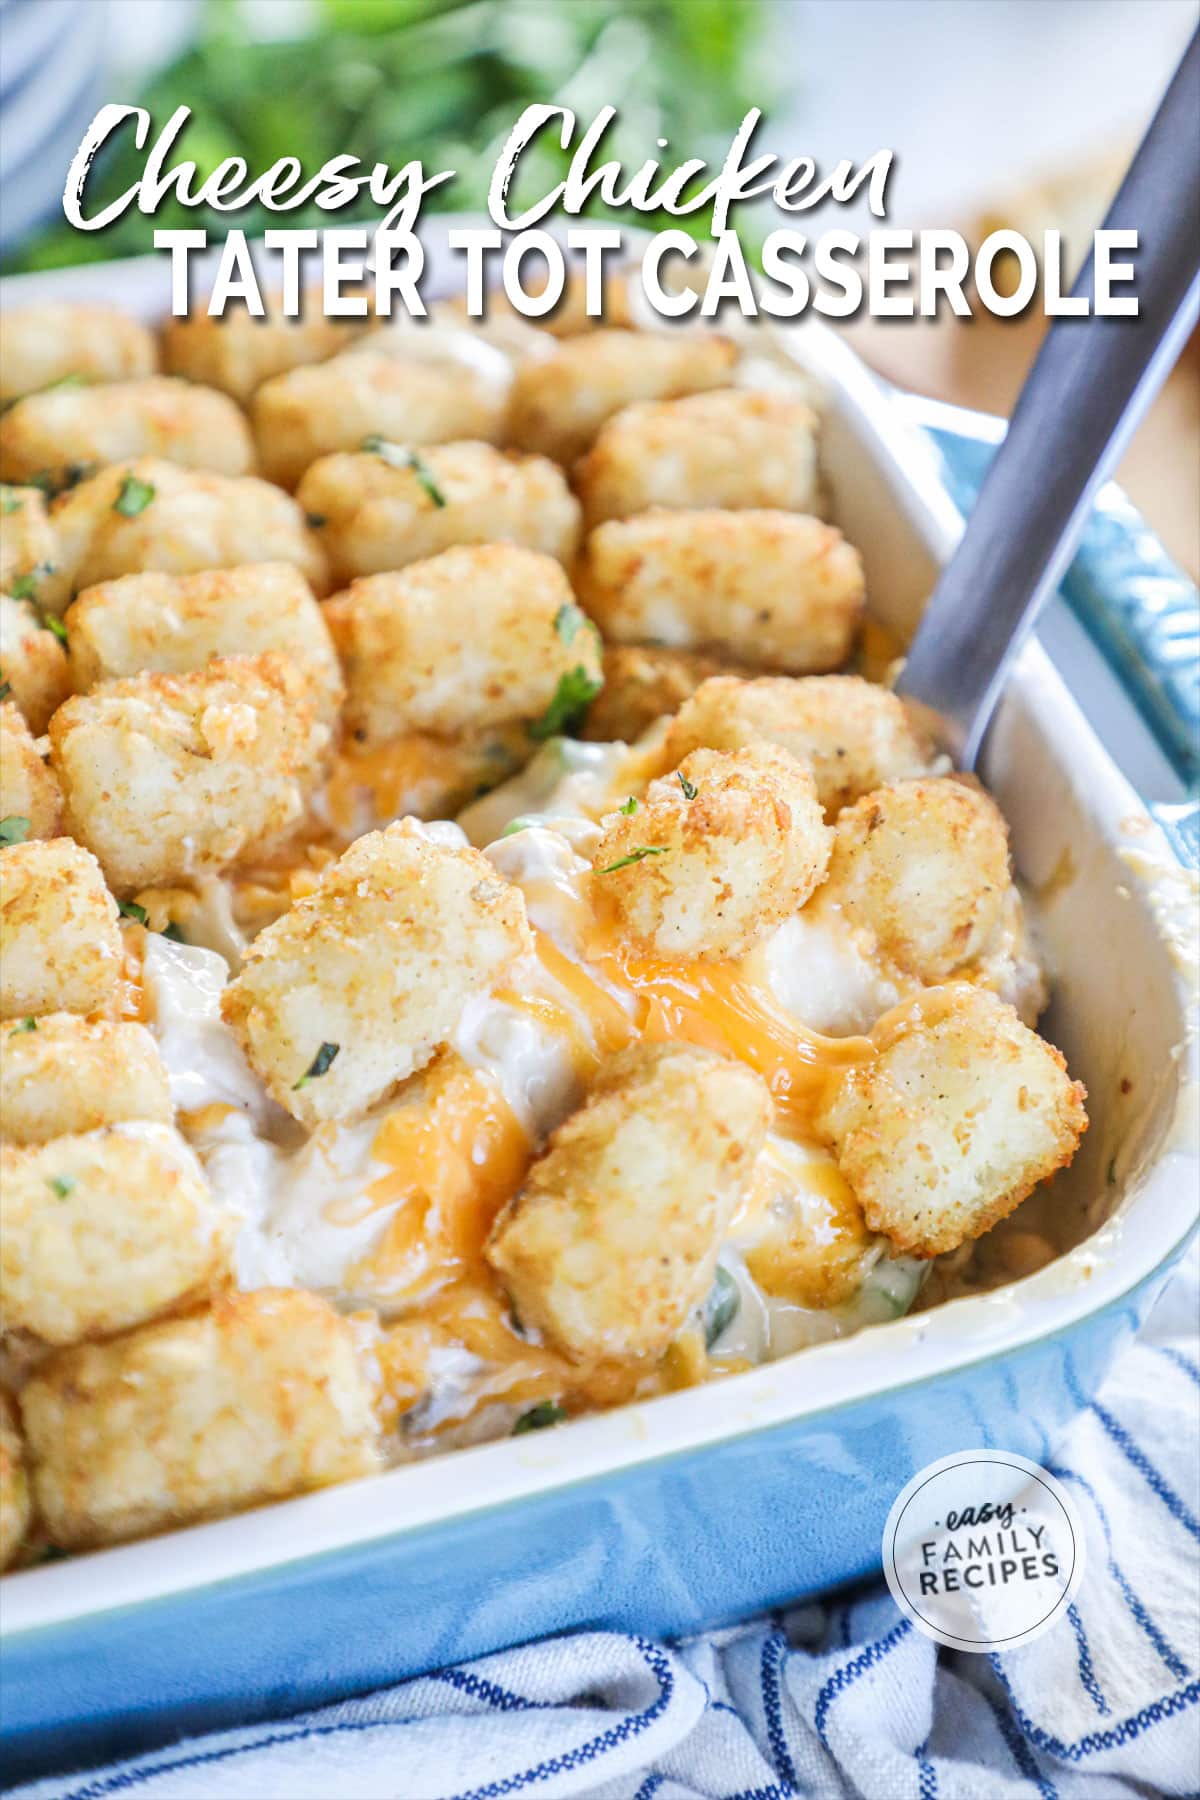 baked cheesy chicken tater tot casserole in a blue casserole dish being scooped with a serving spoon.